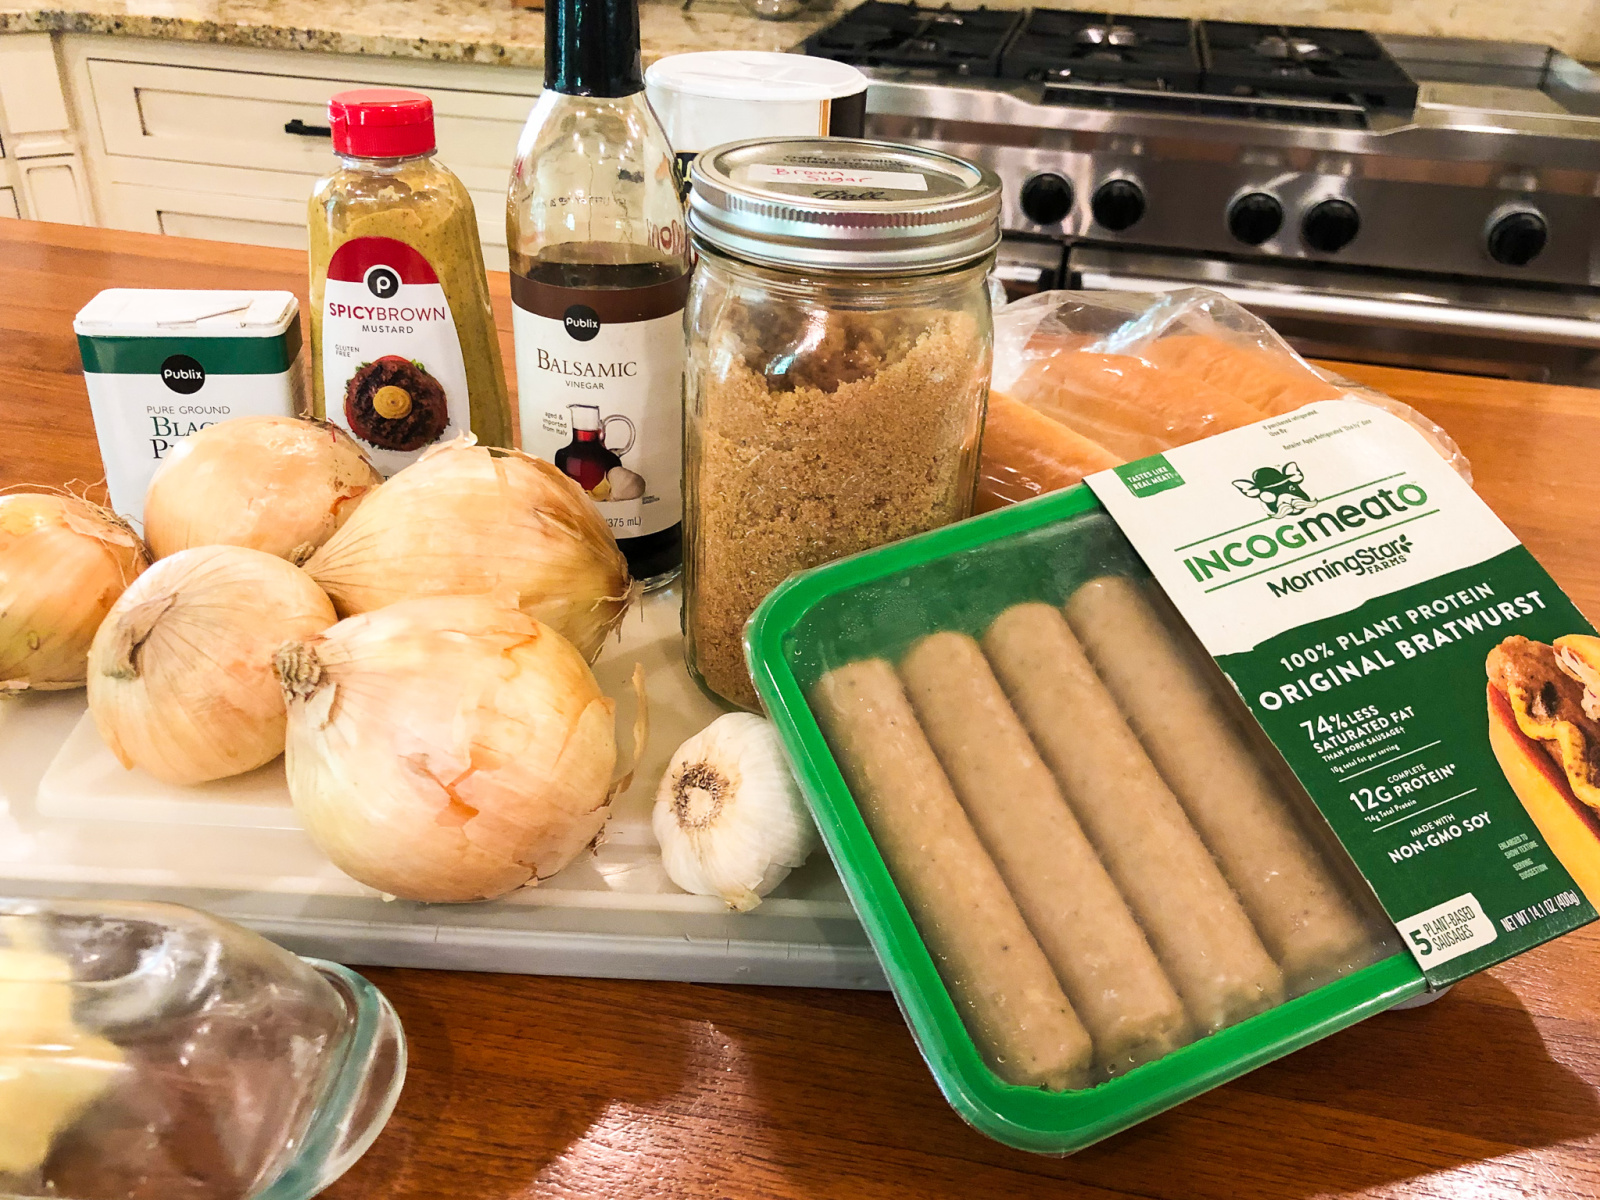 Incogmeato Bratwurst and Italian Sausage Products Are Available At Select Publix Stores - Tasty, Juicy And 100% Plant Based! on I Heart Publix 3